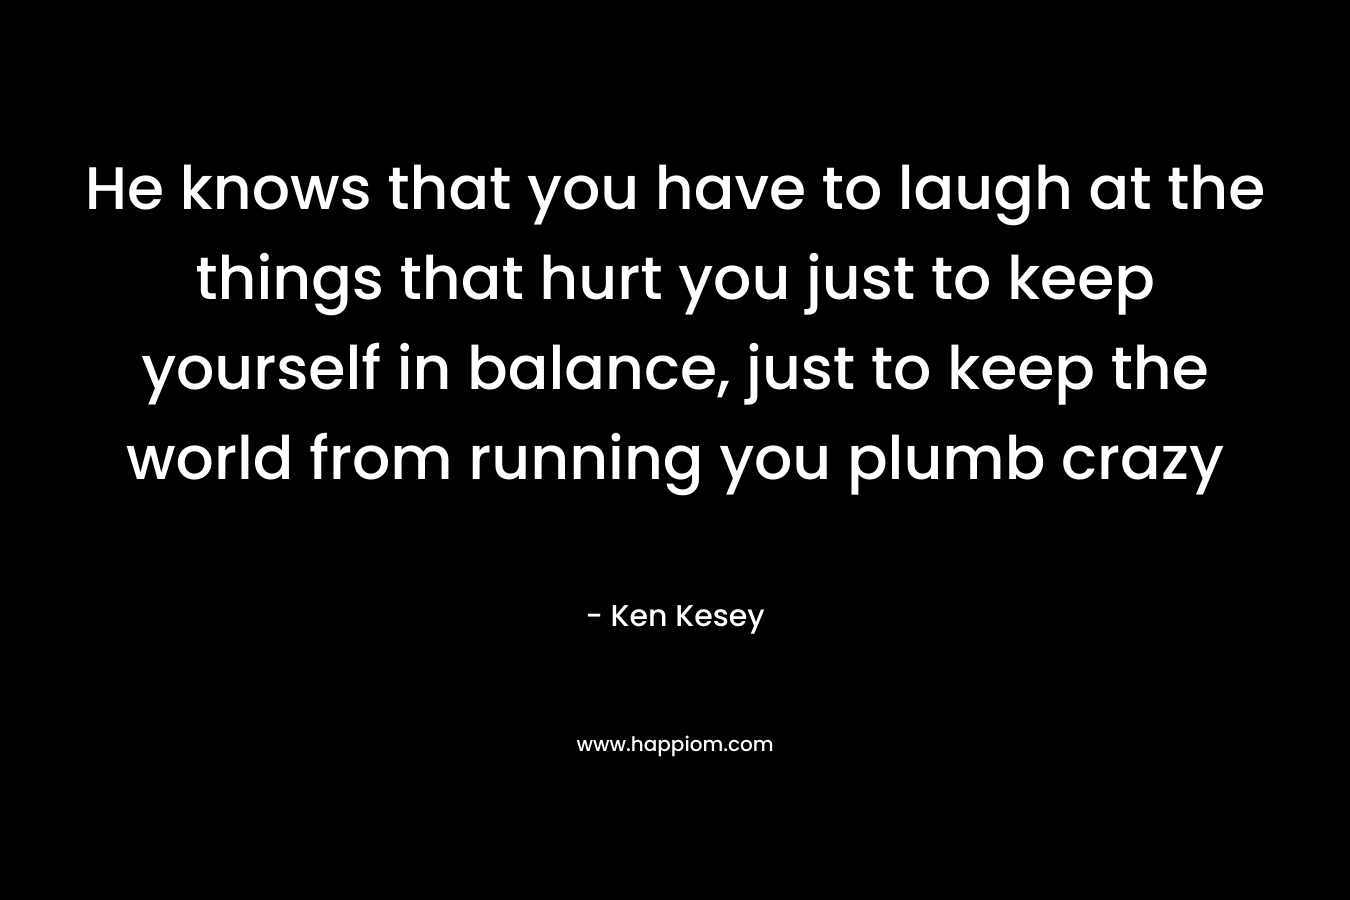 He knows that you have to laugh at the things that hurt you just to keep yourself in balance, just to keep the world from running you plumb crazy – Ken Kesey